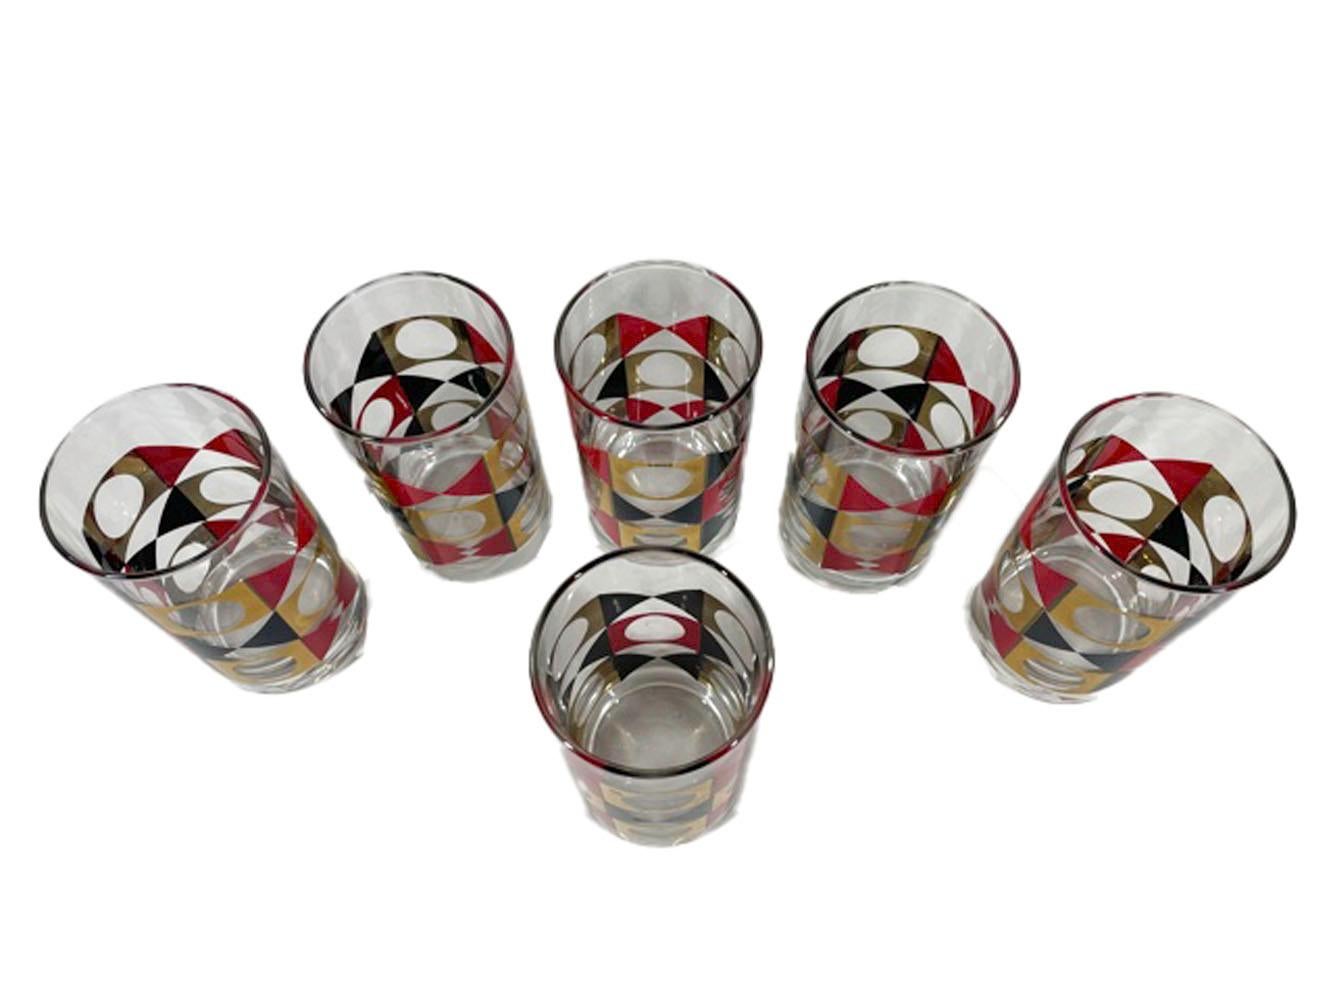 American Set of 6 Vintage Geometric Cocktail Glasses in Red & Black Enamel with 22k Gold For Sale